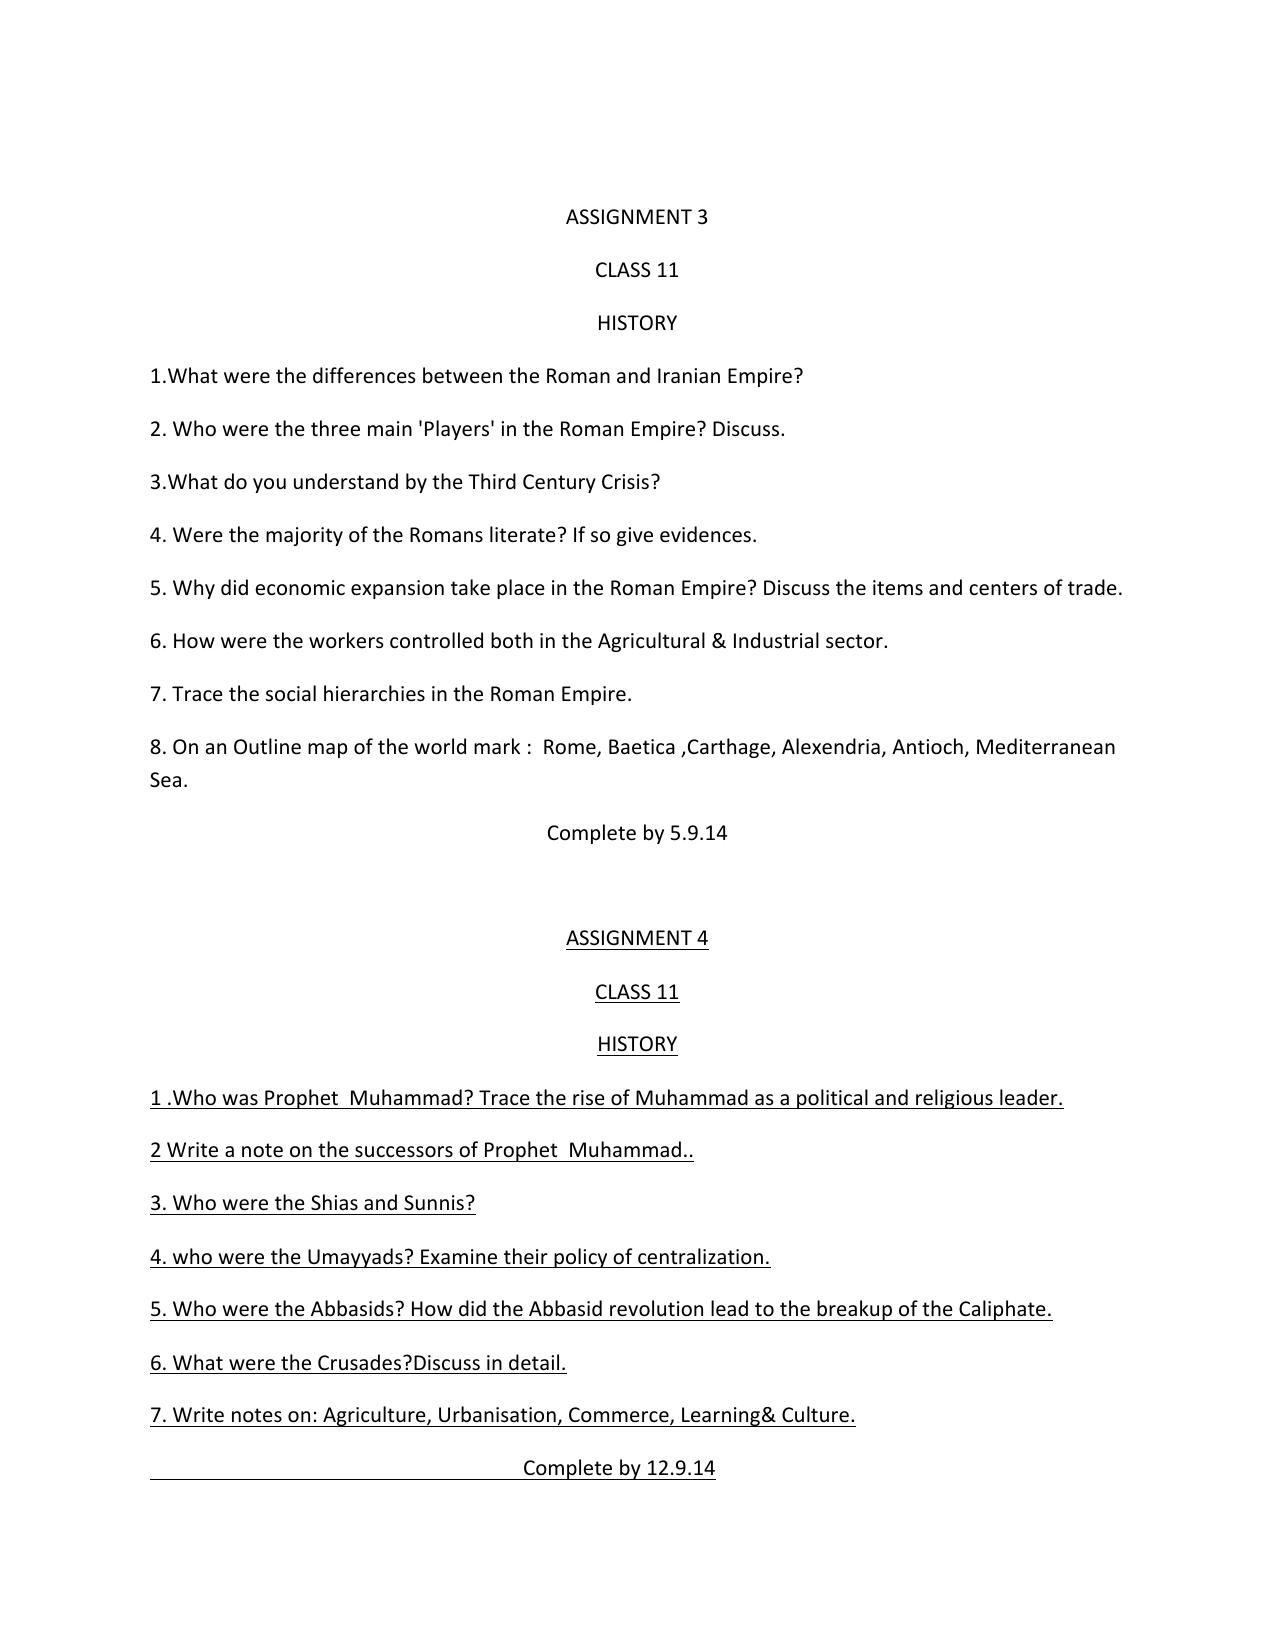 CBSE Worksheets for Class 11 History Roman and Iranian Empire Assignment - Page 1